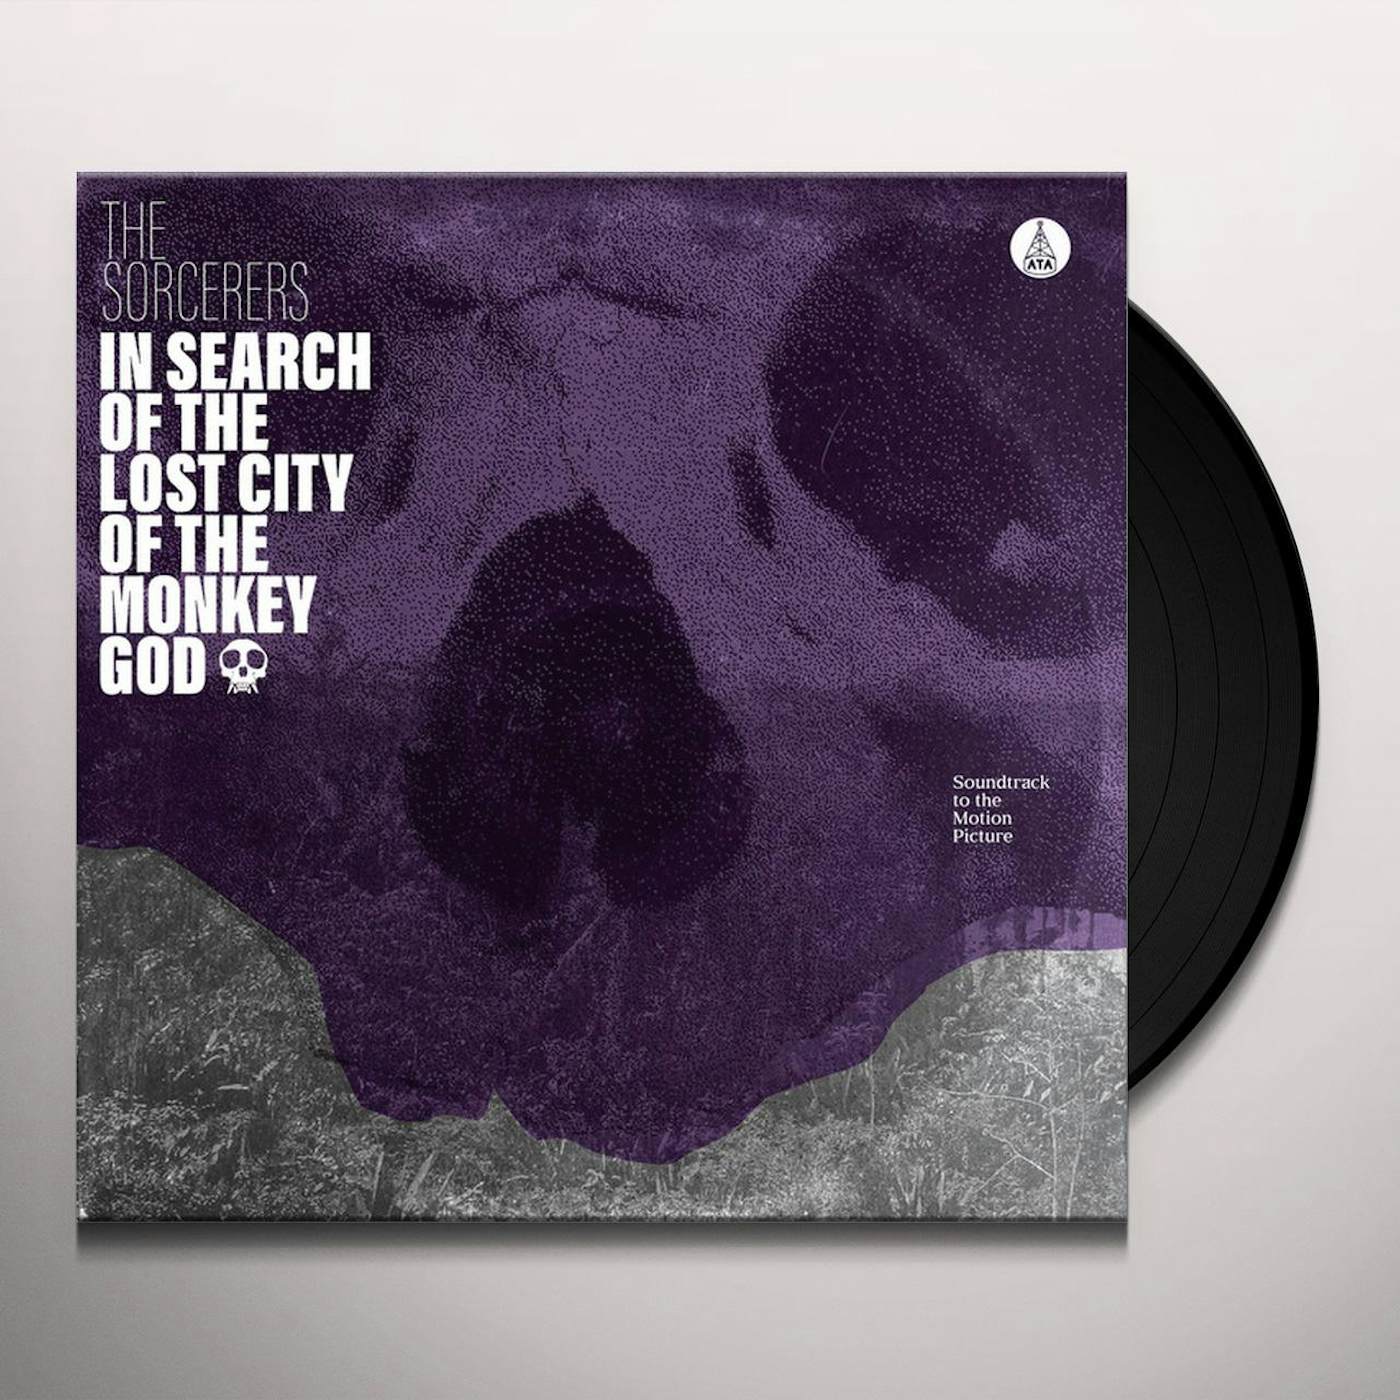 The Sorcerers In Search of the Lost City of the Monkey God Vinyl Record